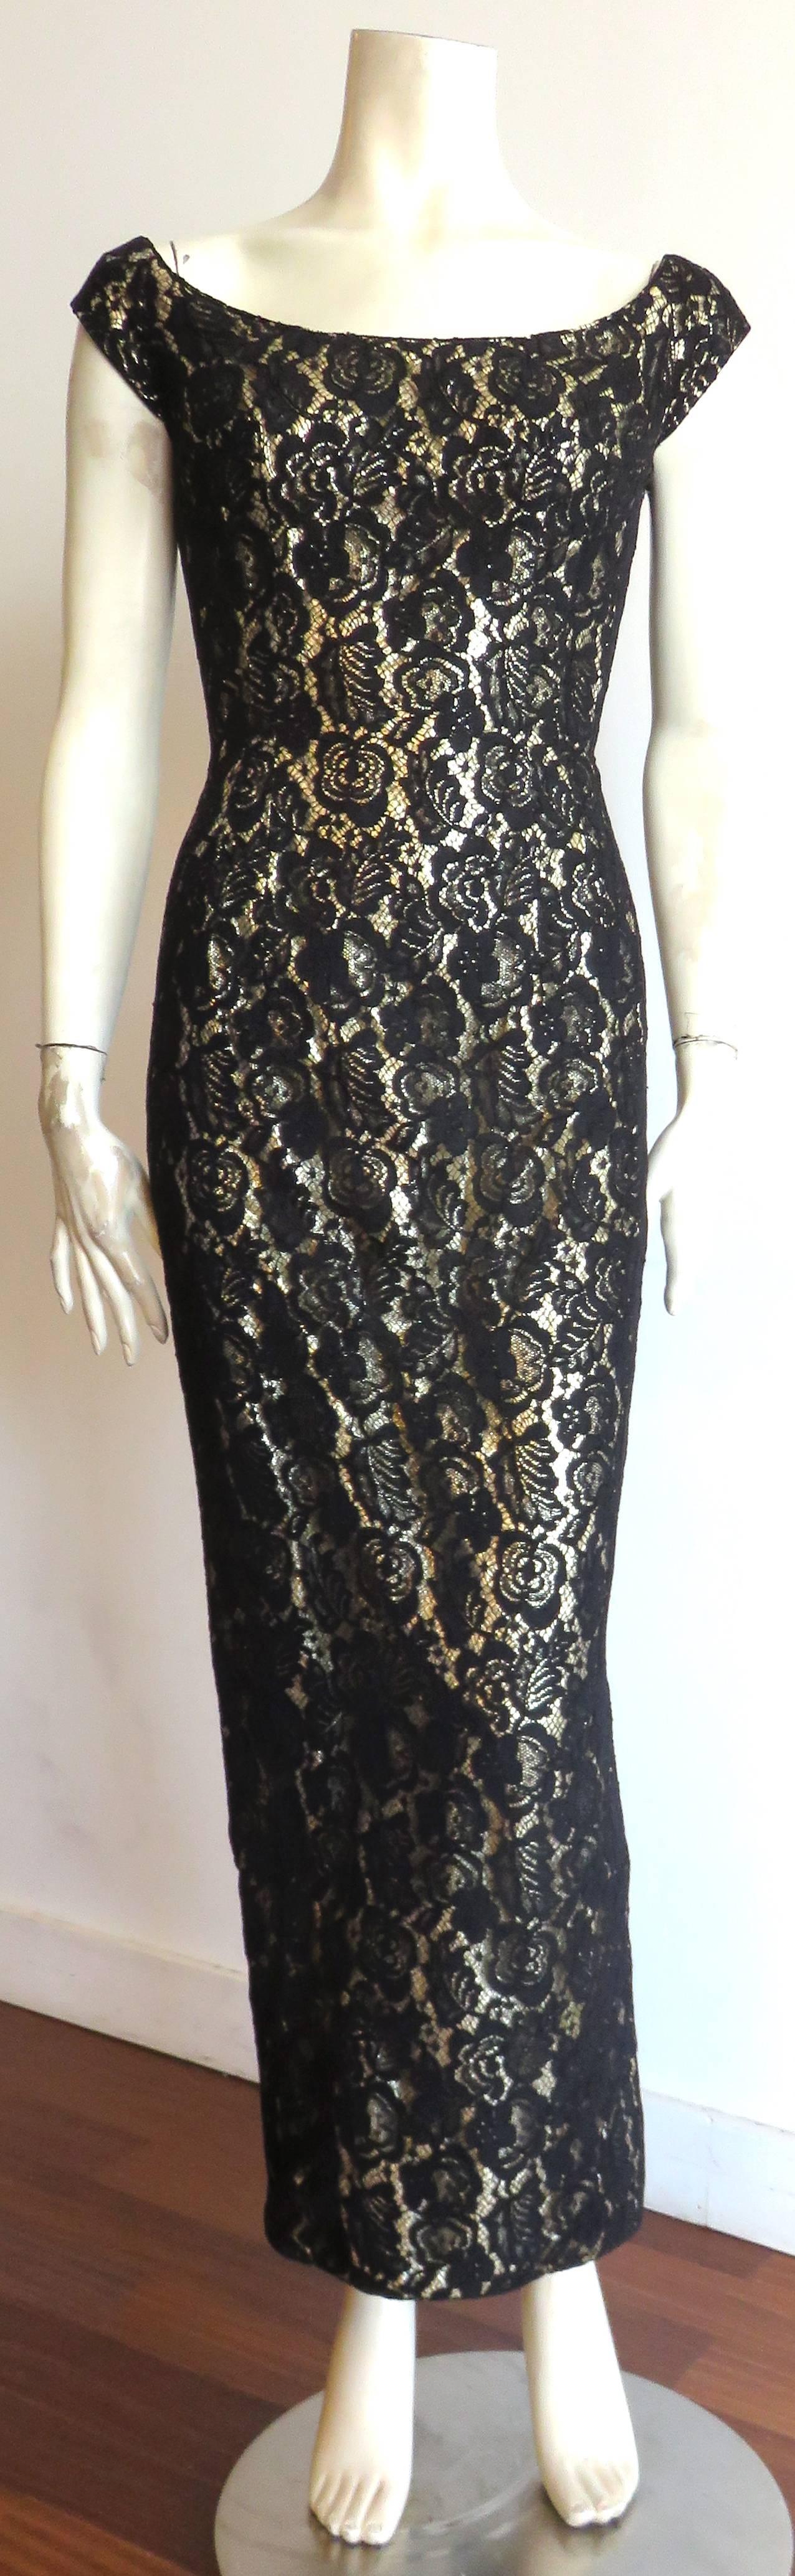 Excellent condition, 1960's MR. BLACKWELL CUSTOM, Gold lame with black lace overlay evening dress.

Sexy, body-con silhouette.

'V' shaped back neckline with mini-bow tie detail at center-back top zipper.

Floral, black lace atop, metallic